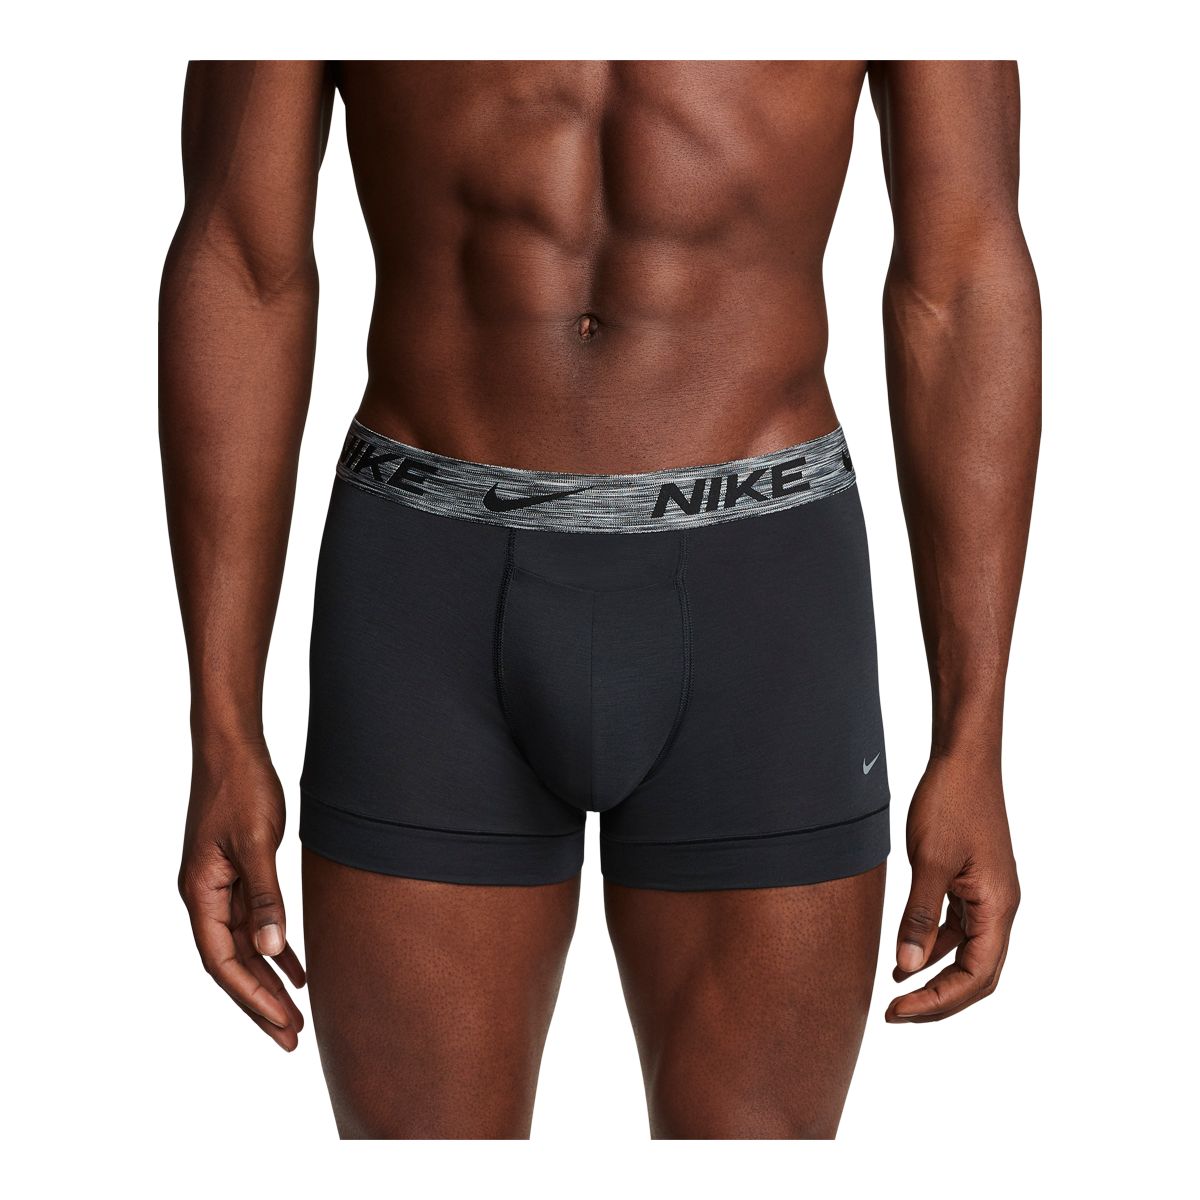 https://media-www.sportchek.ca/product/div-03-softgoods/dpt-79-clothing-accessories/sdpt-01-mens/333824605/nike-dri-fit-reluxe-trunk-2pk-222-blk-0eef2a50-f278-43f0-abab-22d94a40f881-jpgrendition.jpg?imdensity=1&imwidth=1244&impolicy=mZoom